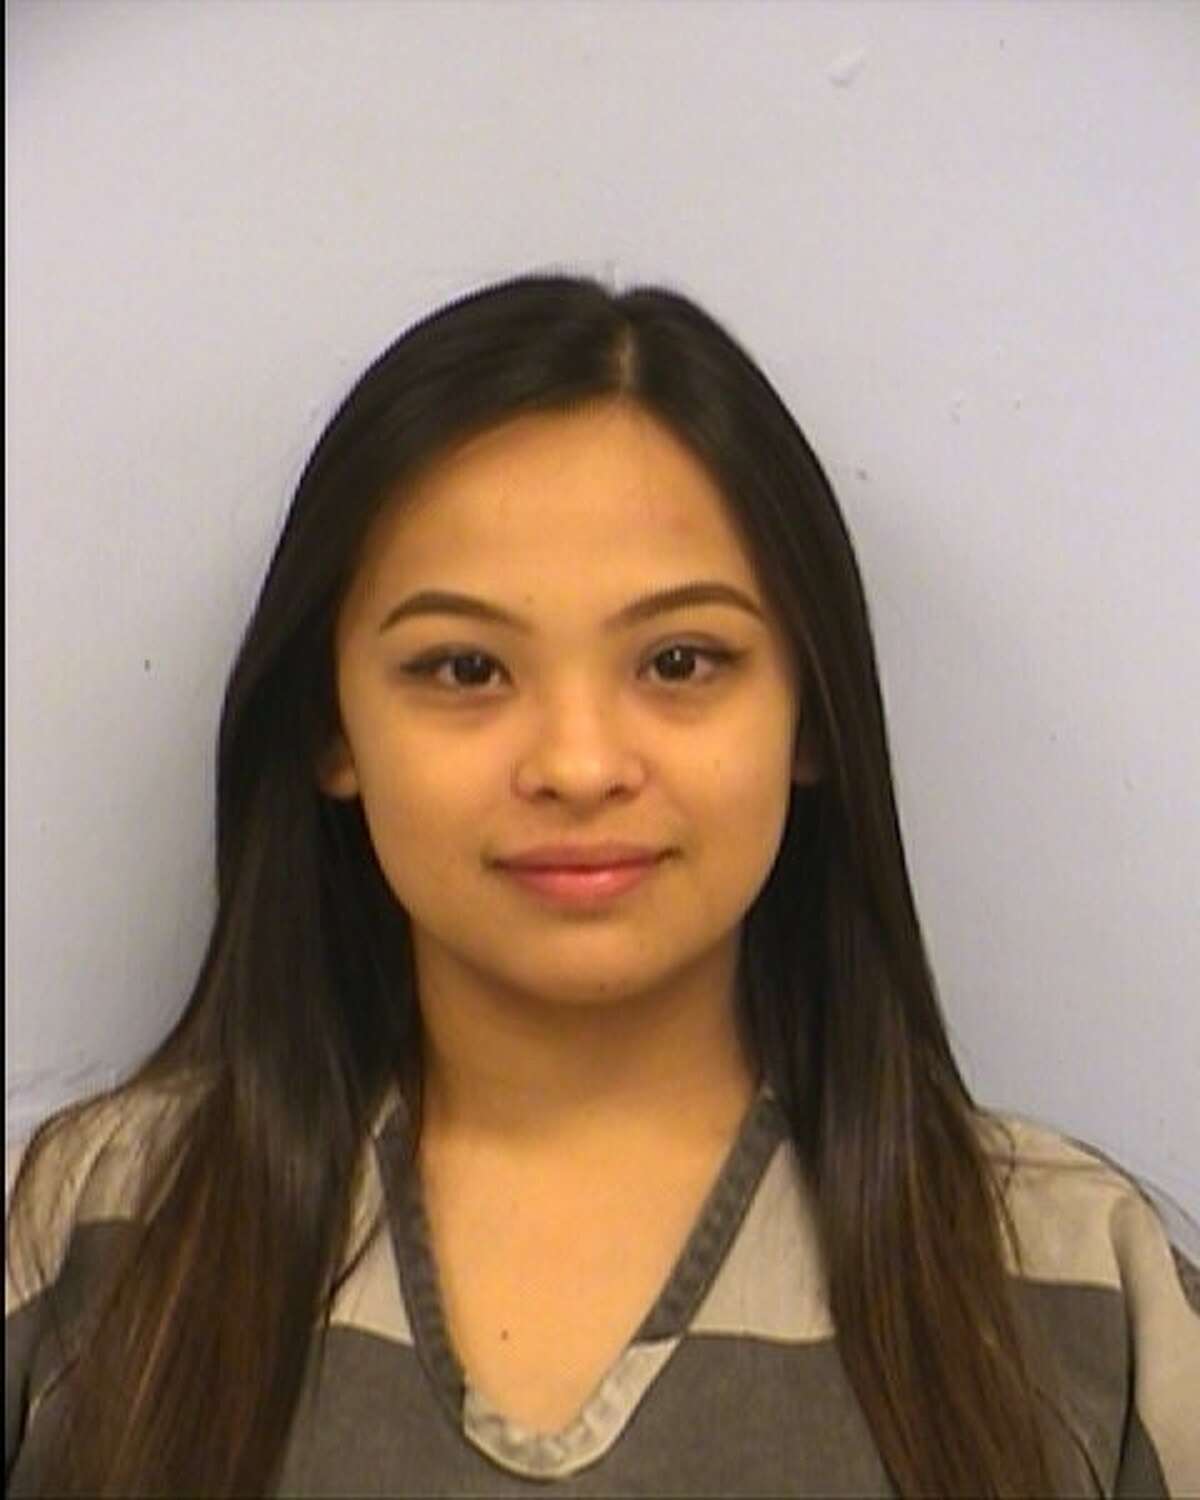 Seline Lizbeth Ayala, 23 was arrested July 12, 2017 in Austin and is facing federal drug trafficking charges, after Austin police found 75 pounds of liquid meth hidden in the vehicle she was driving, they said in a news release.